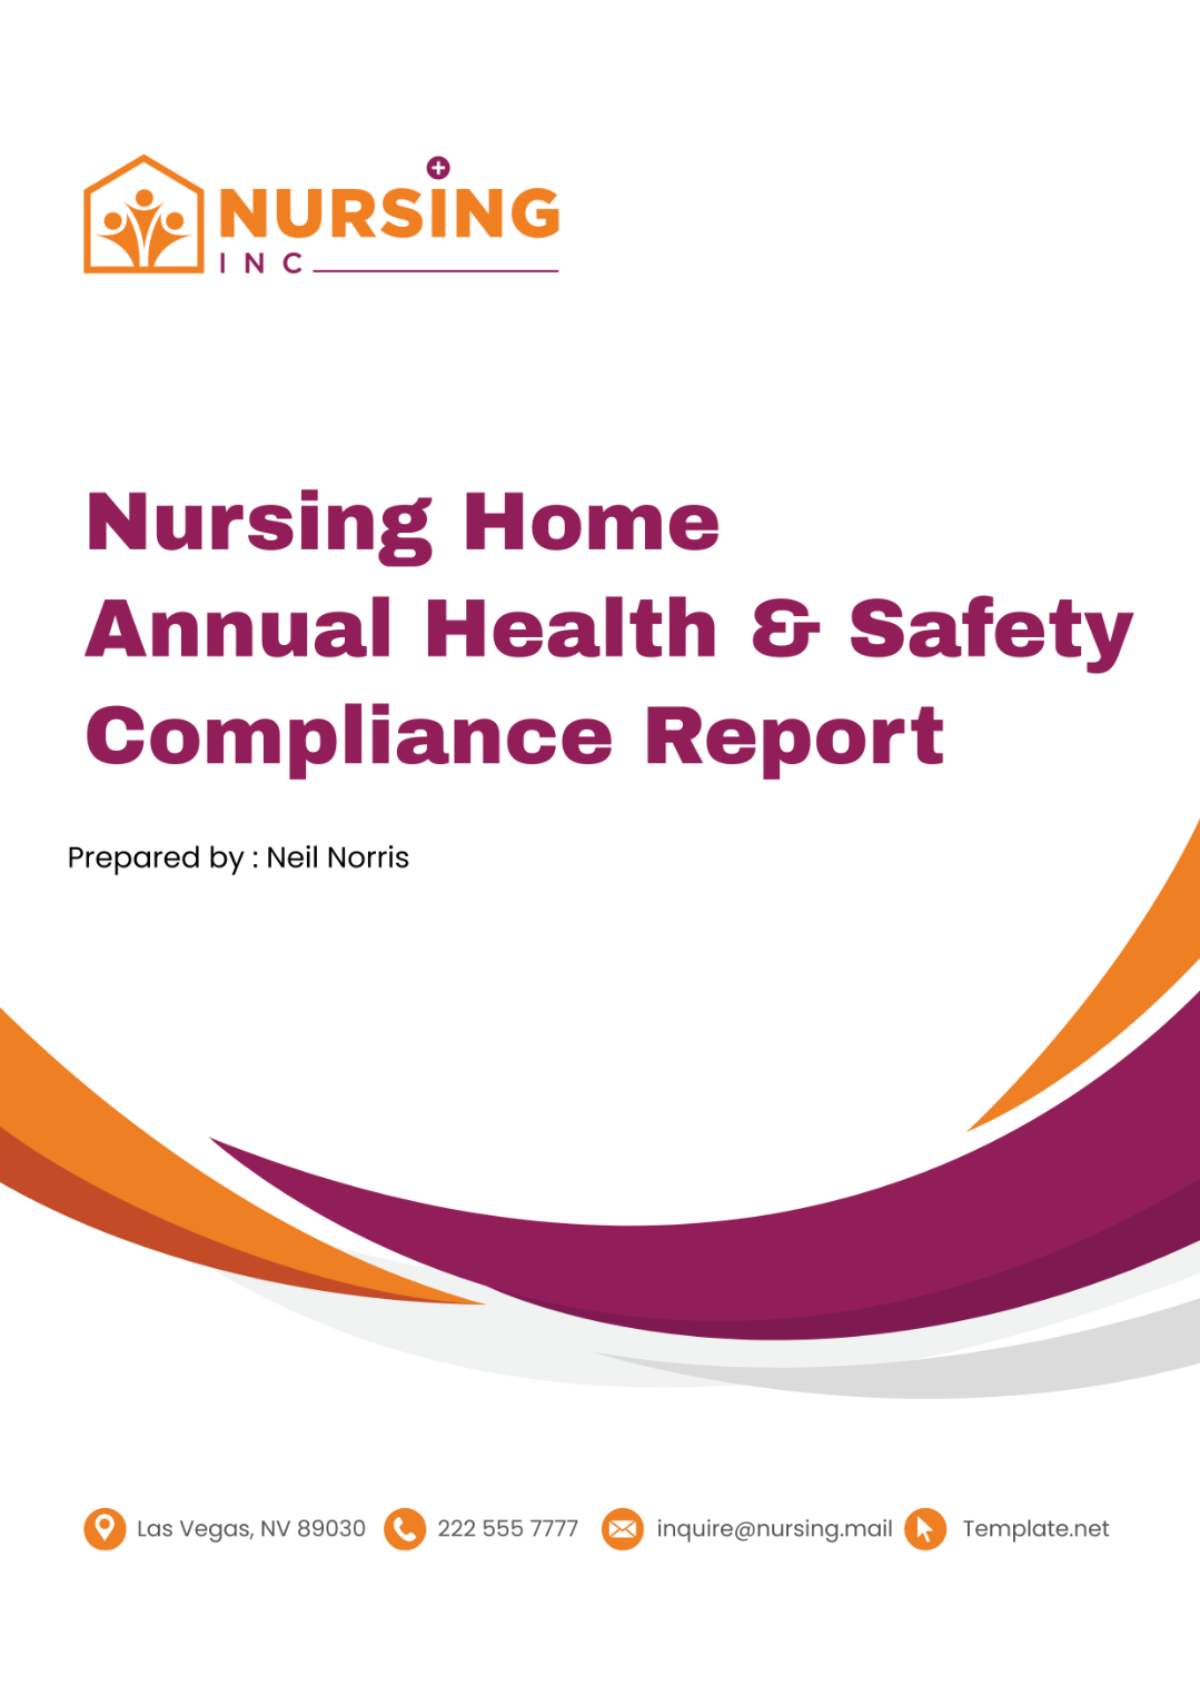 Nursing Home Annual Health & Safety Compliance Report Template